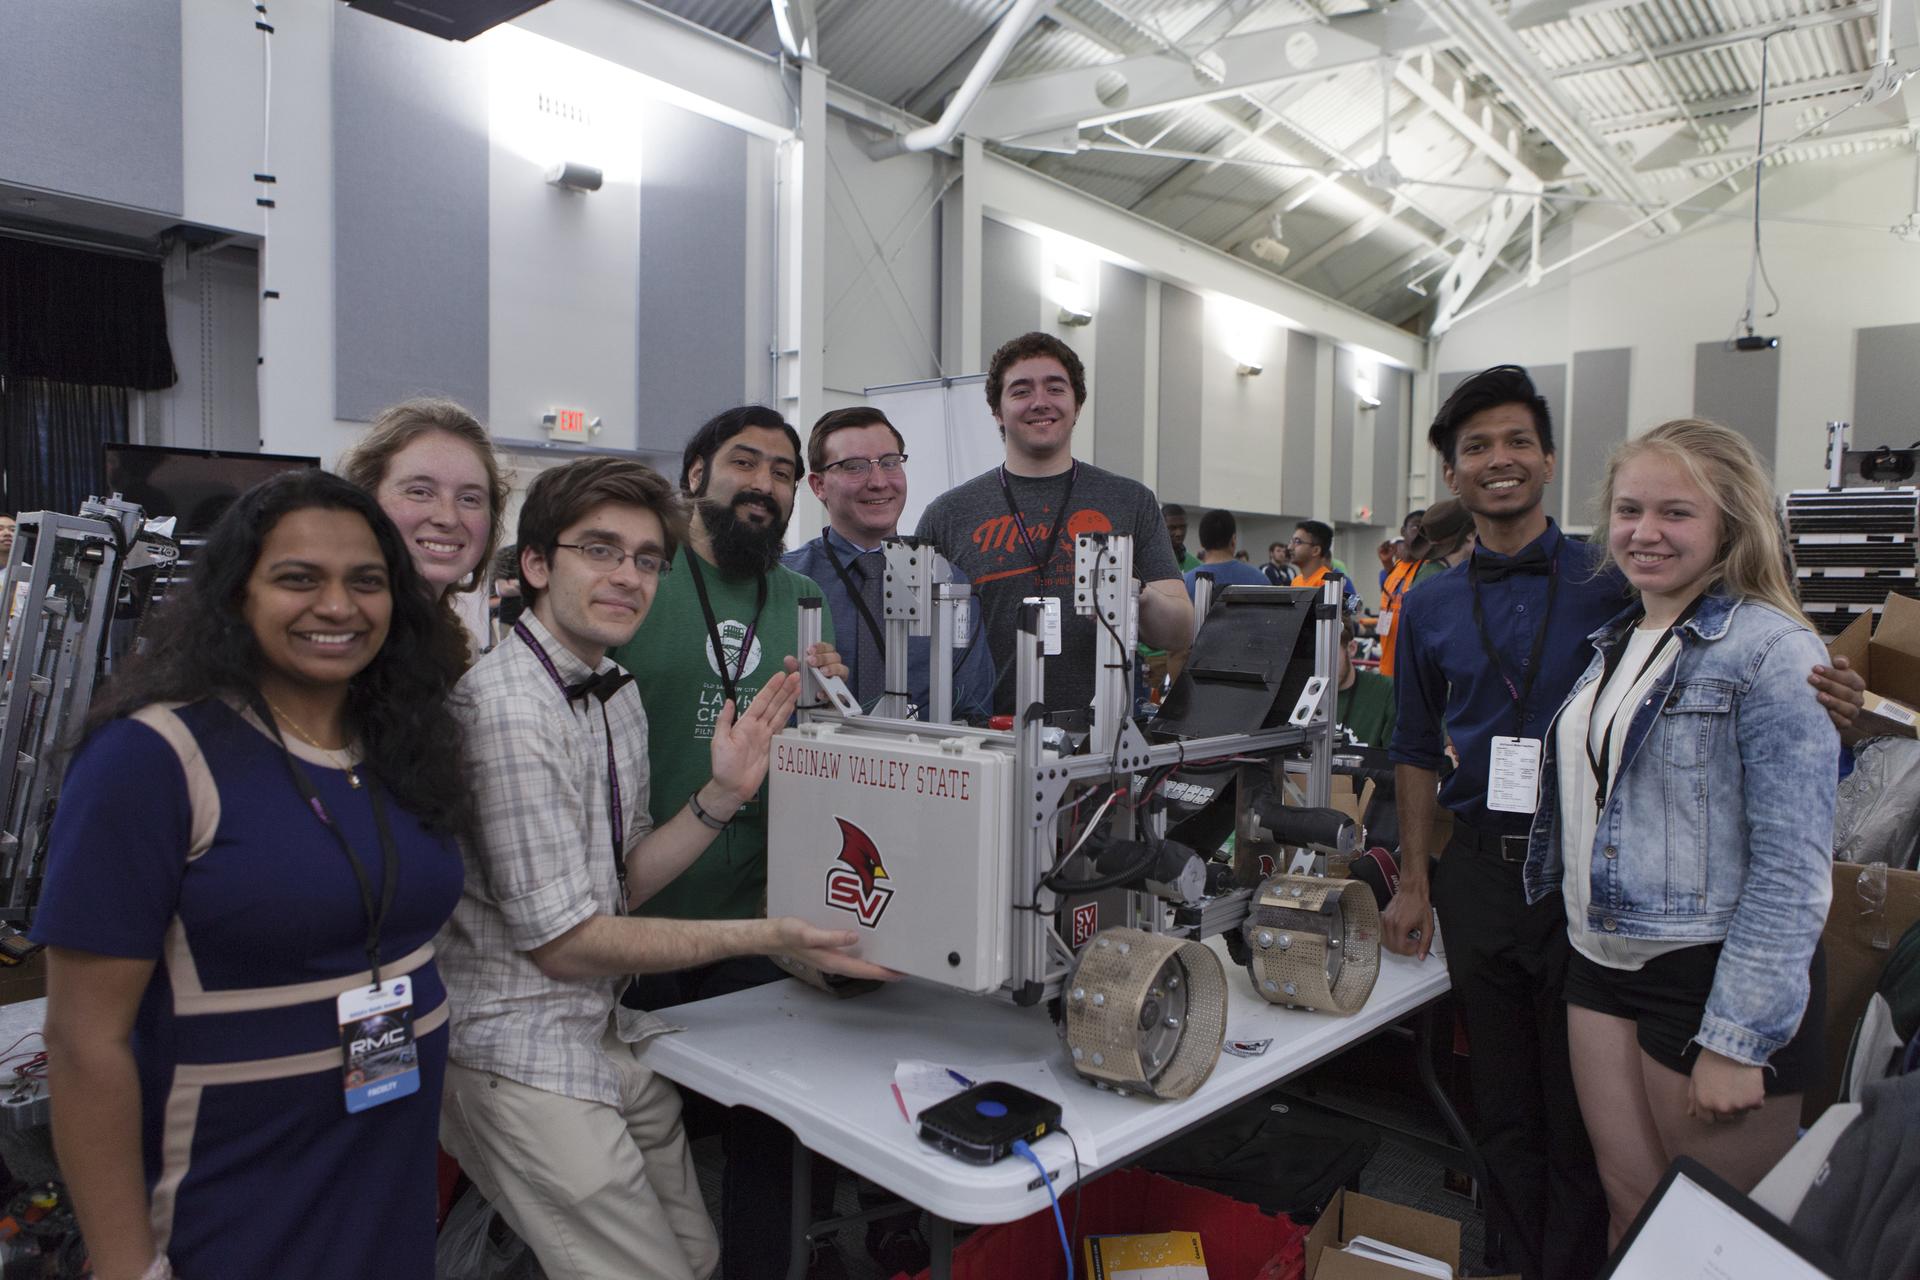 A group of students pose with their project